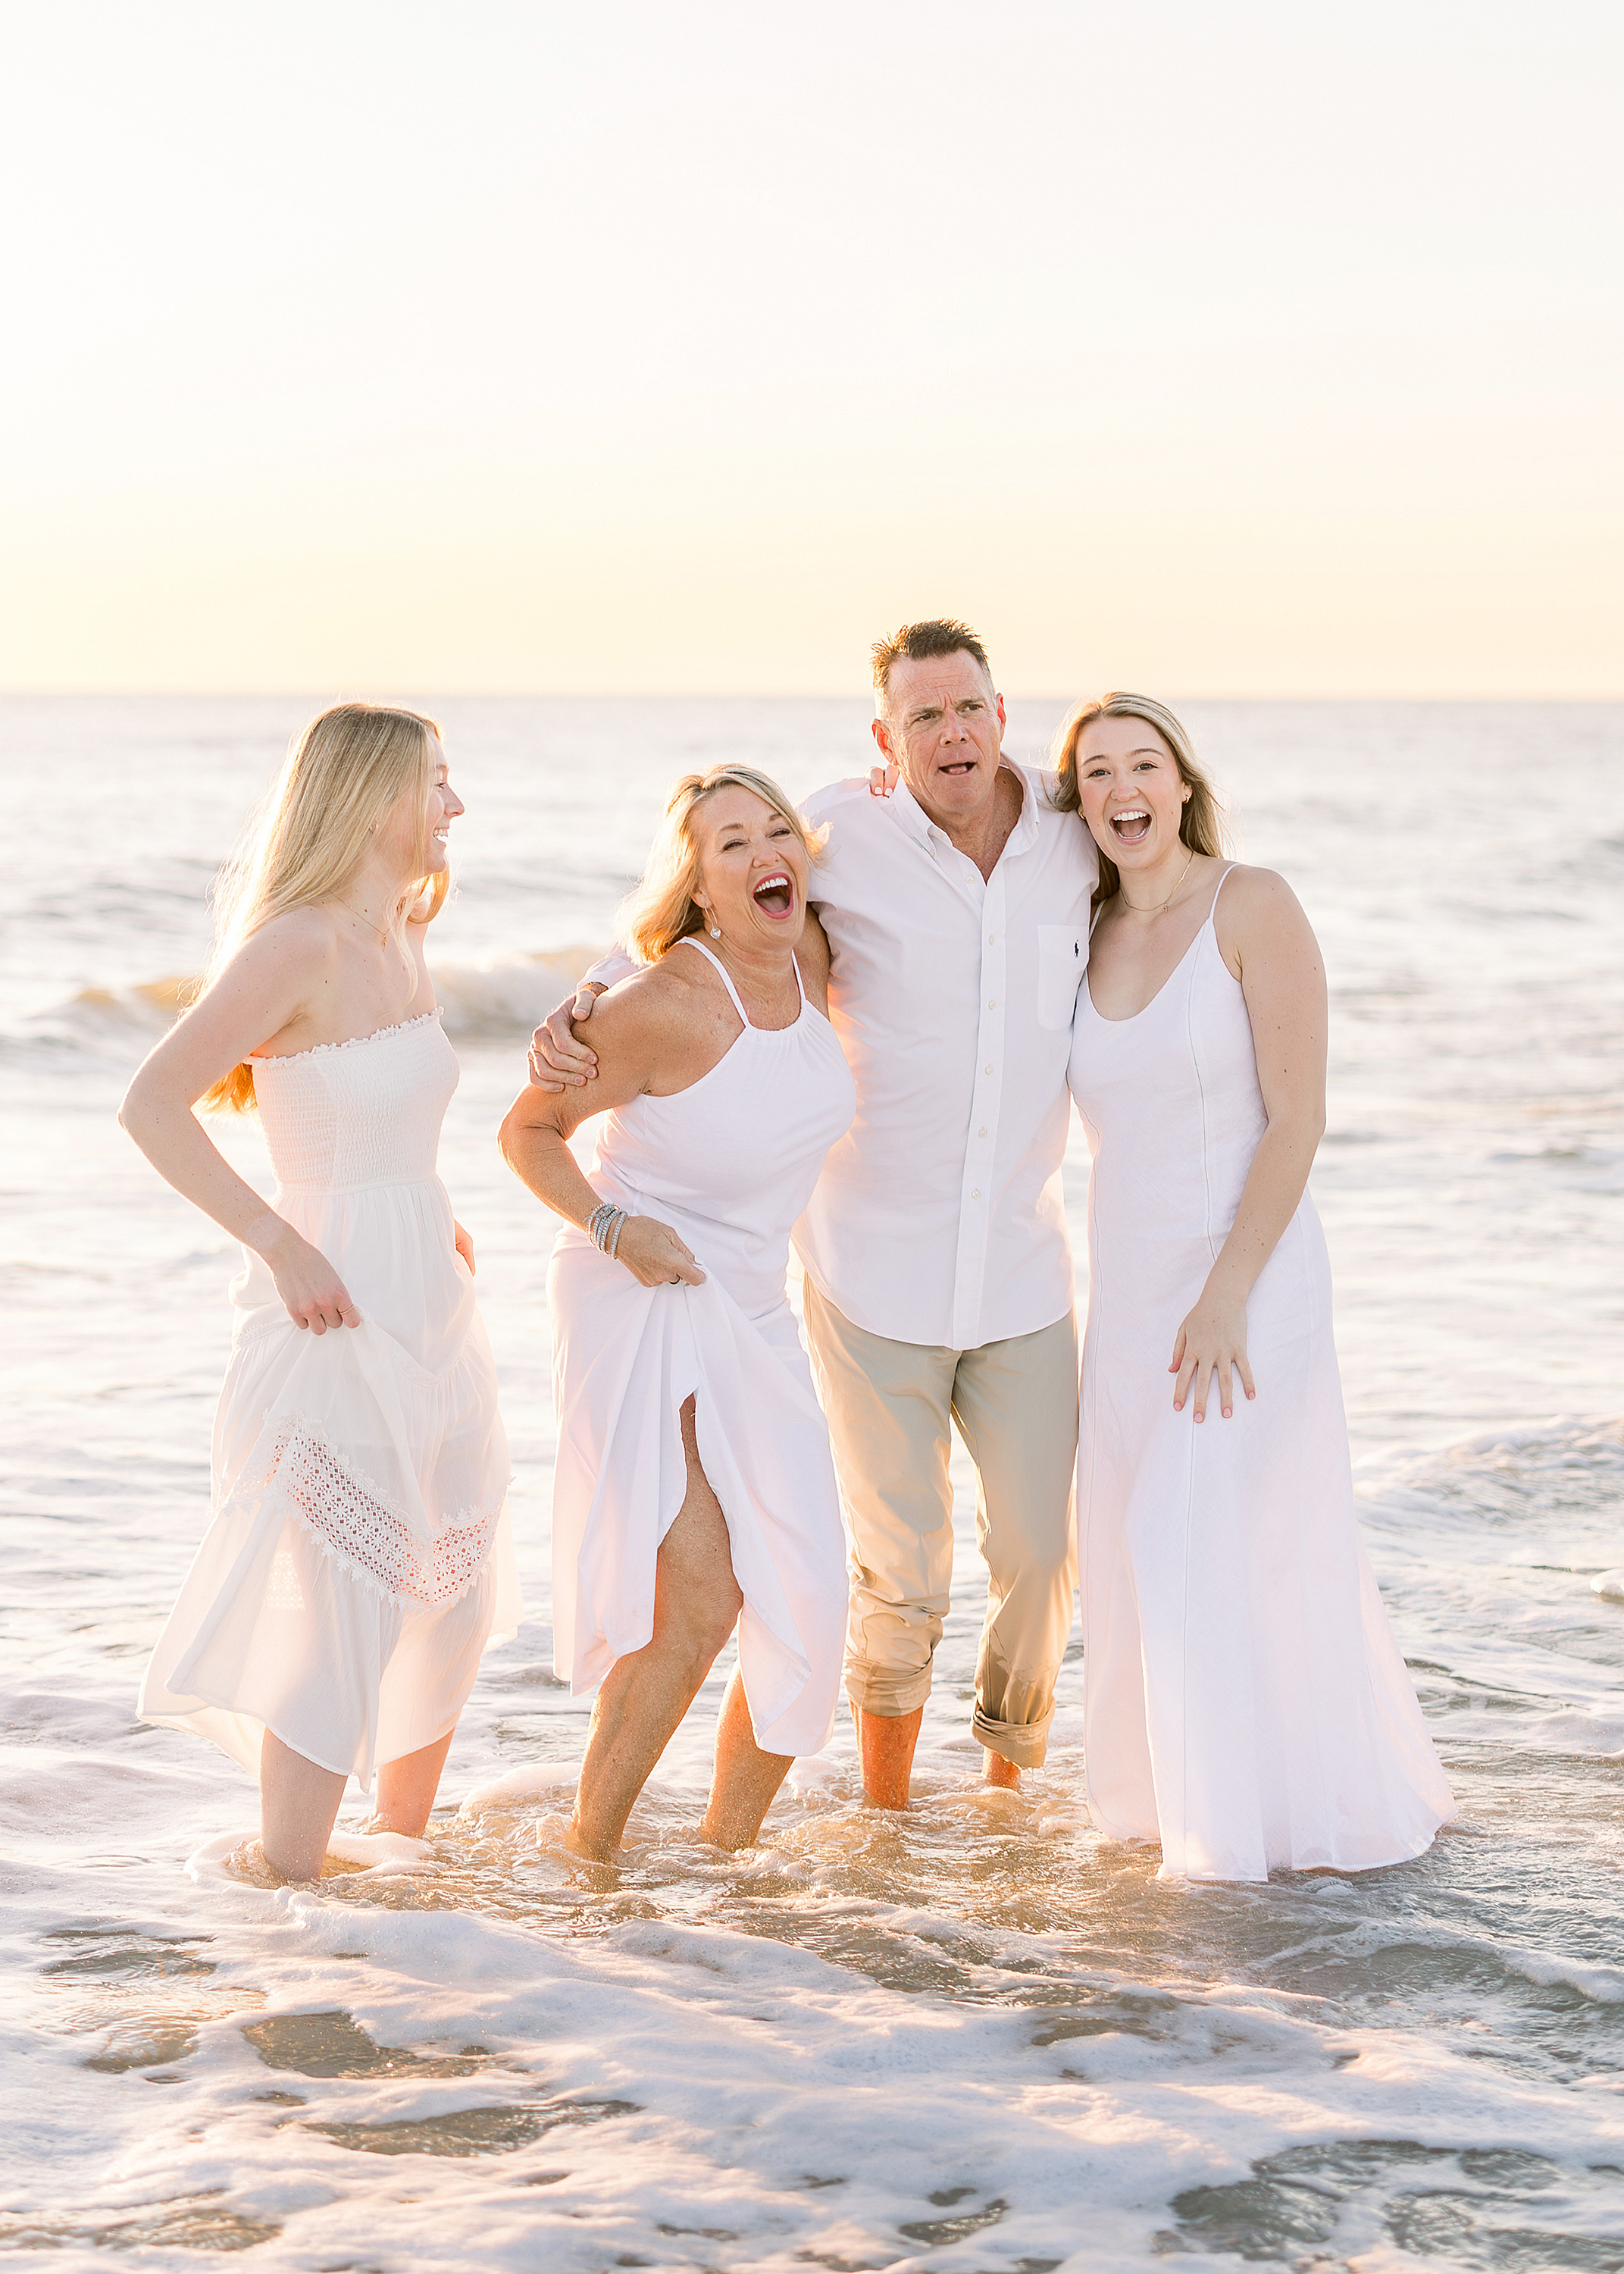 A sunrise family portrait of a family of four on the beach.